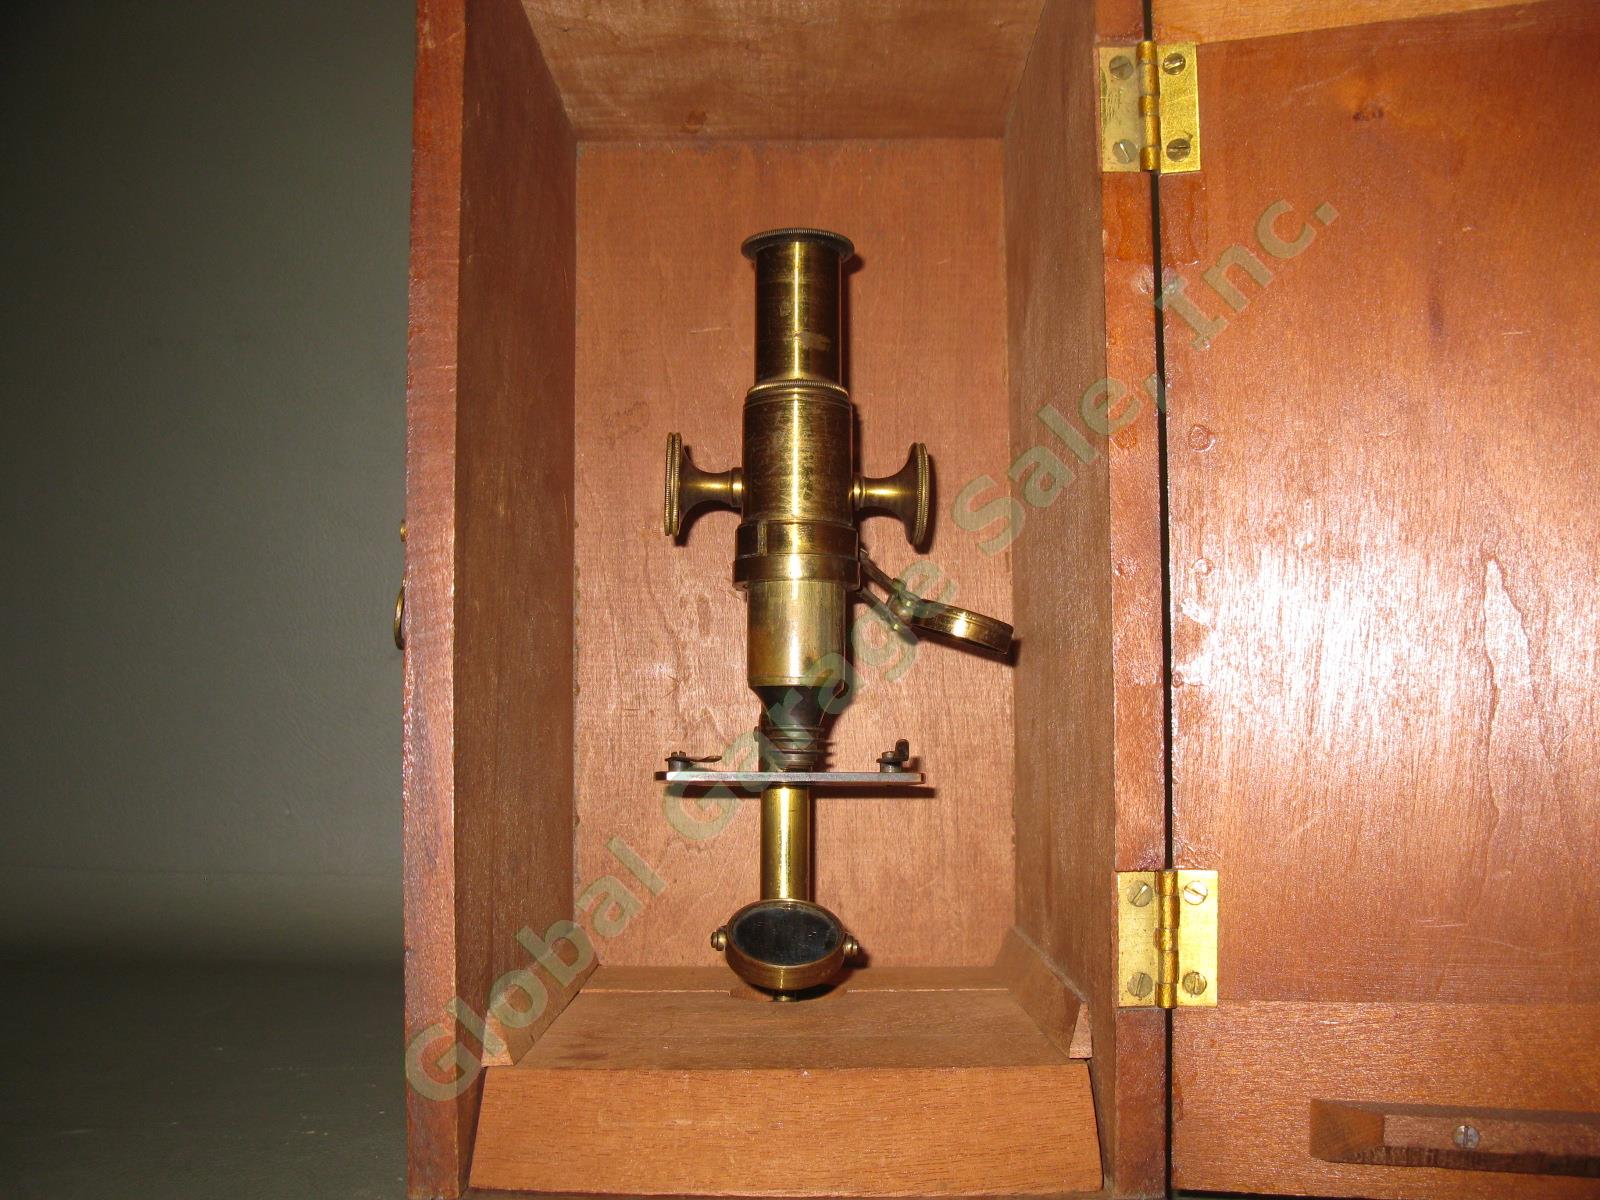 8" Vtg Antique Brass Microscope Marked "12" On Base W/ Wood Wooden Case Box Lot 11